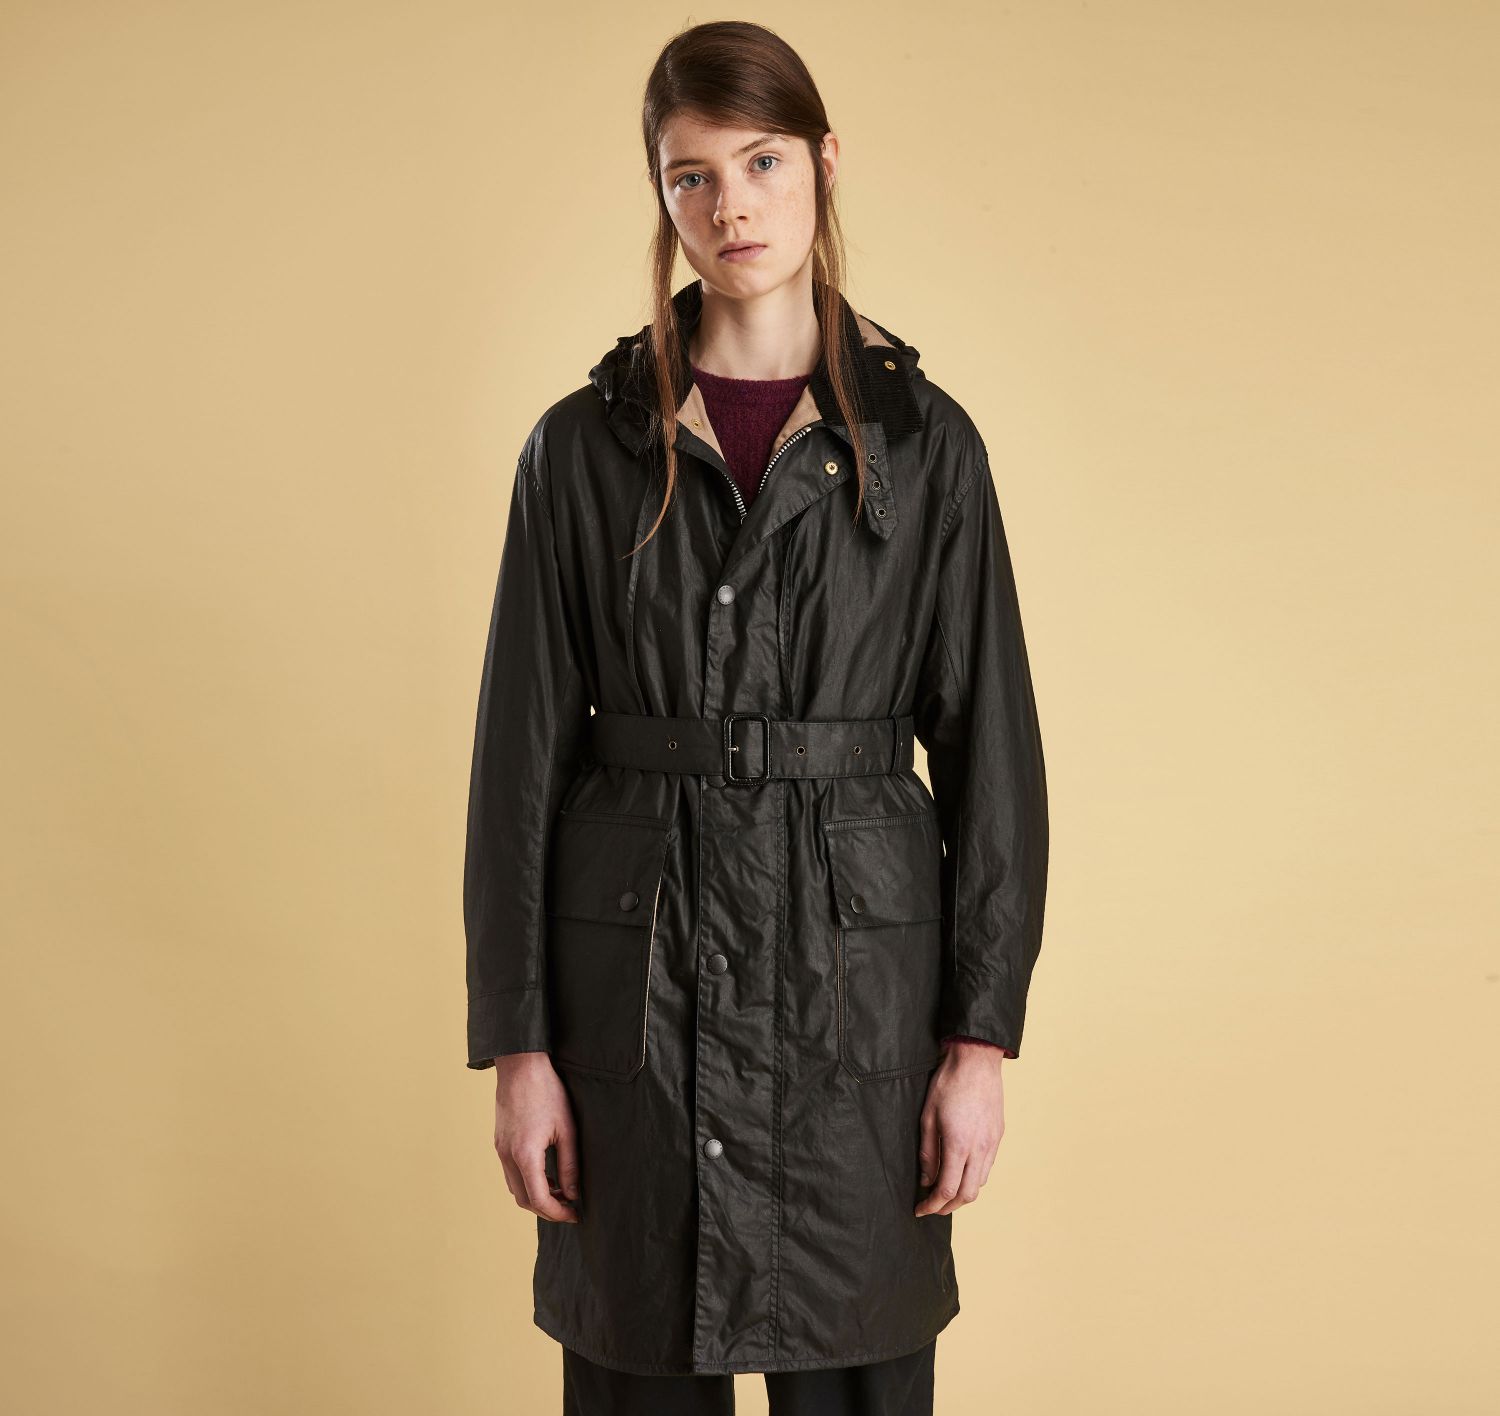 barbour margaret howell ursula waxed cotton jacket